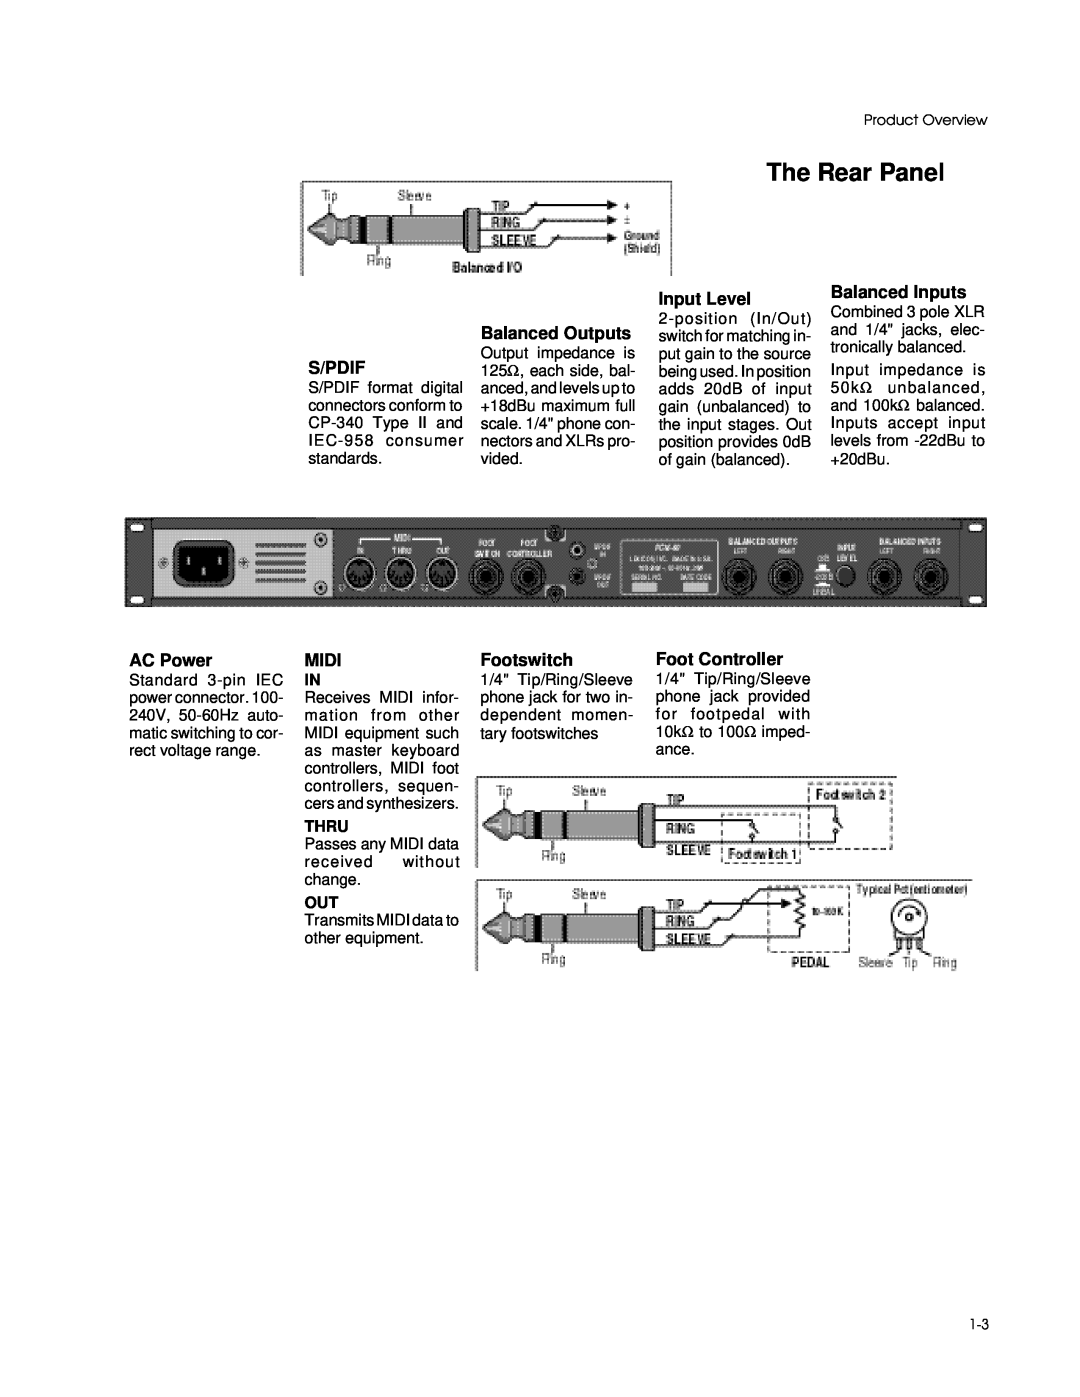 Lexicon PCM 80 manual The Rear Panel, S/Pdif, AC Power, Midi, Balanced Outputs, Footswitch, Input Level, Foot Controller 